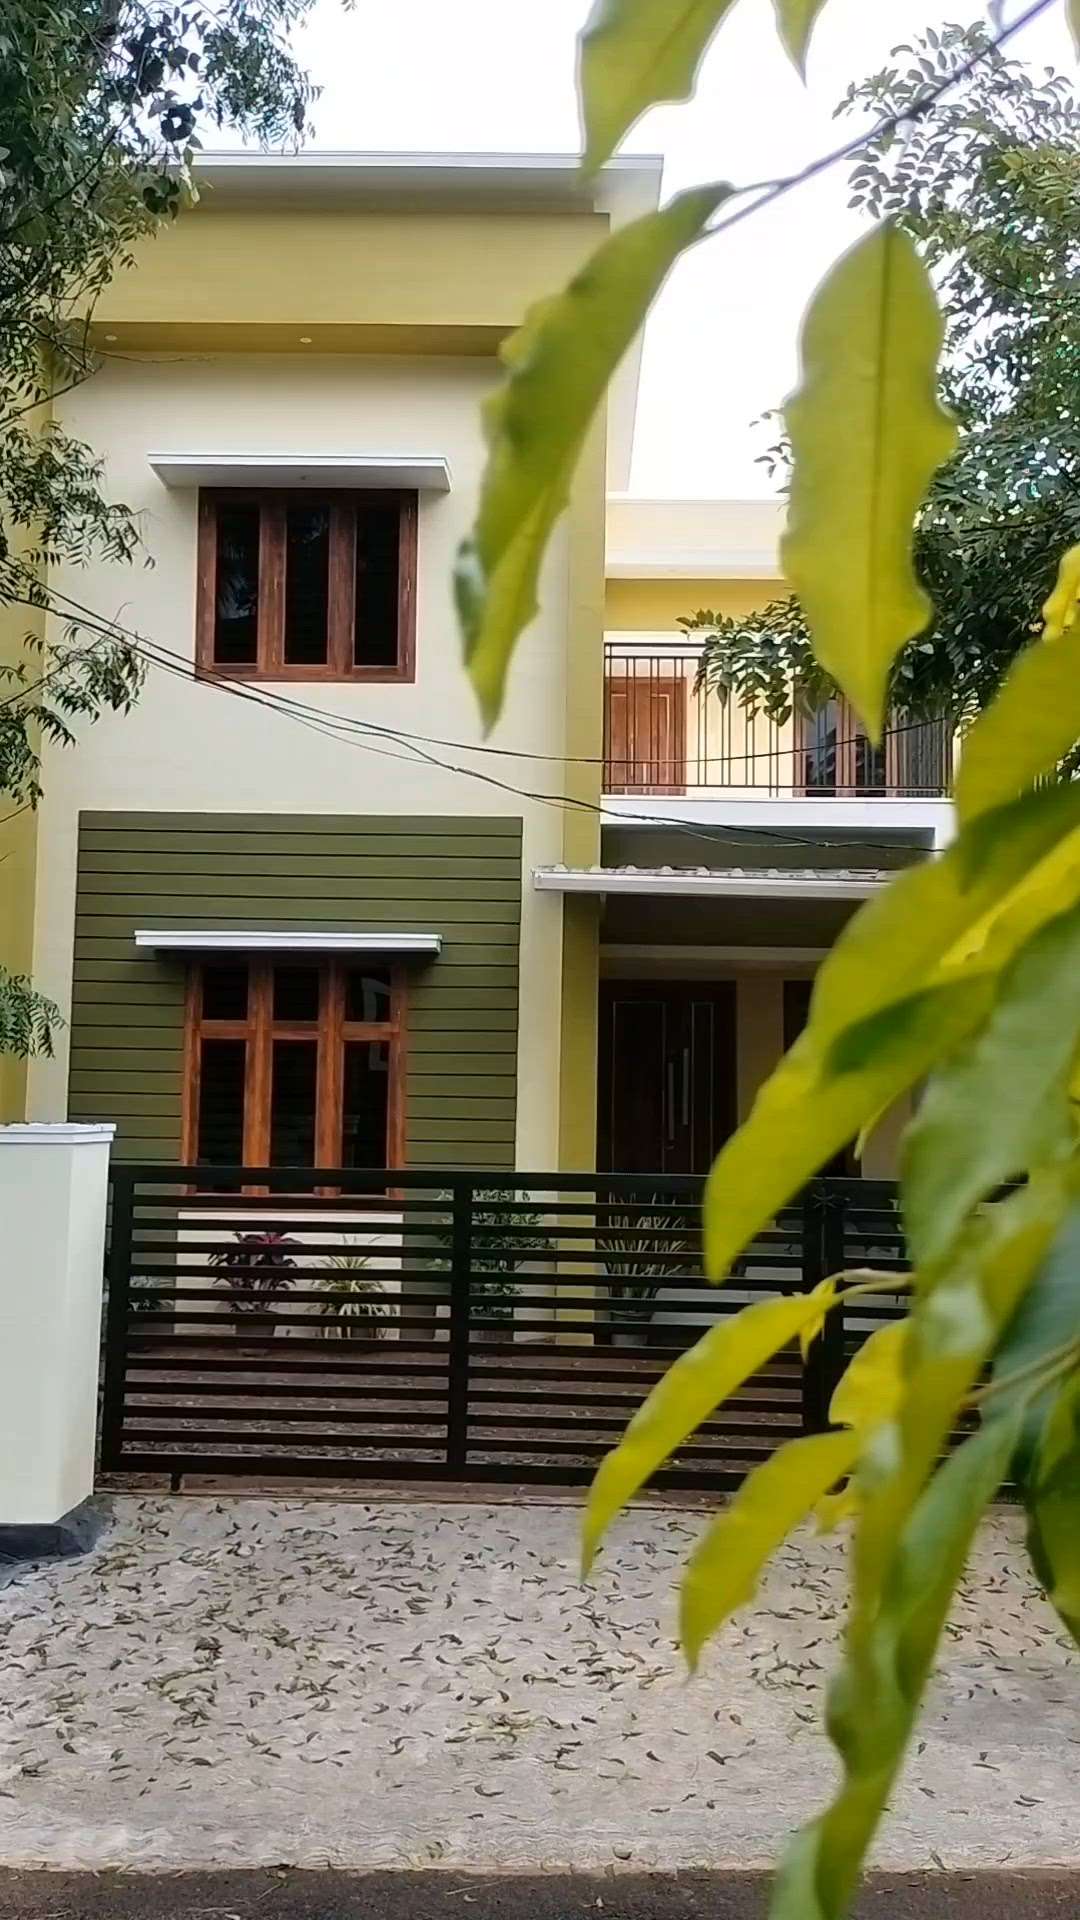 1350/3bhk/Contemporary style
5 cent/double storey/Thrissur

Project Name: 3bhk,Contemporary style house 
Storey: double
Total Area: 1350
Bed Room: 3bhk
Elevation Style: Contemporary
Location: Thrissur
Completed Year: 

Cost: 23 lakh
Plot Size: 5 cent